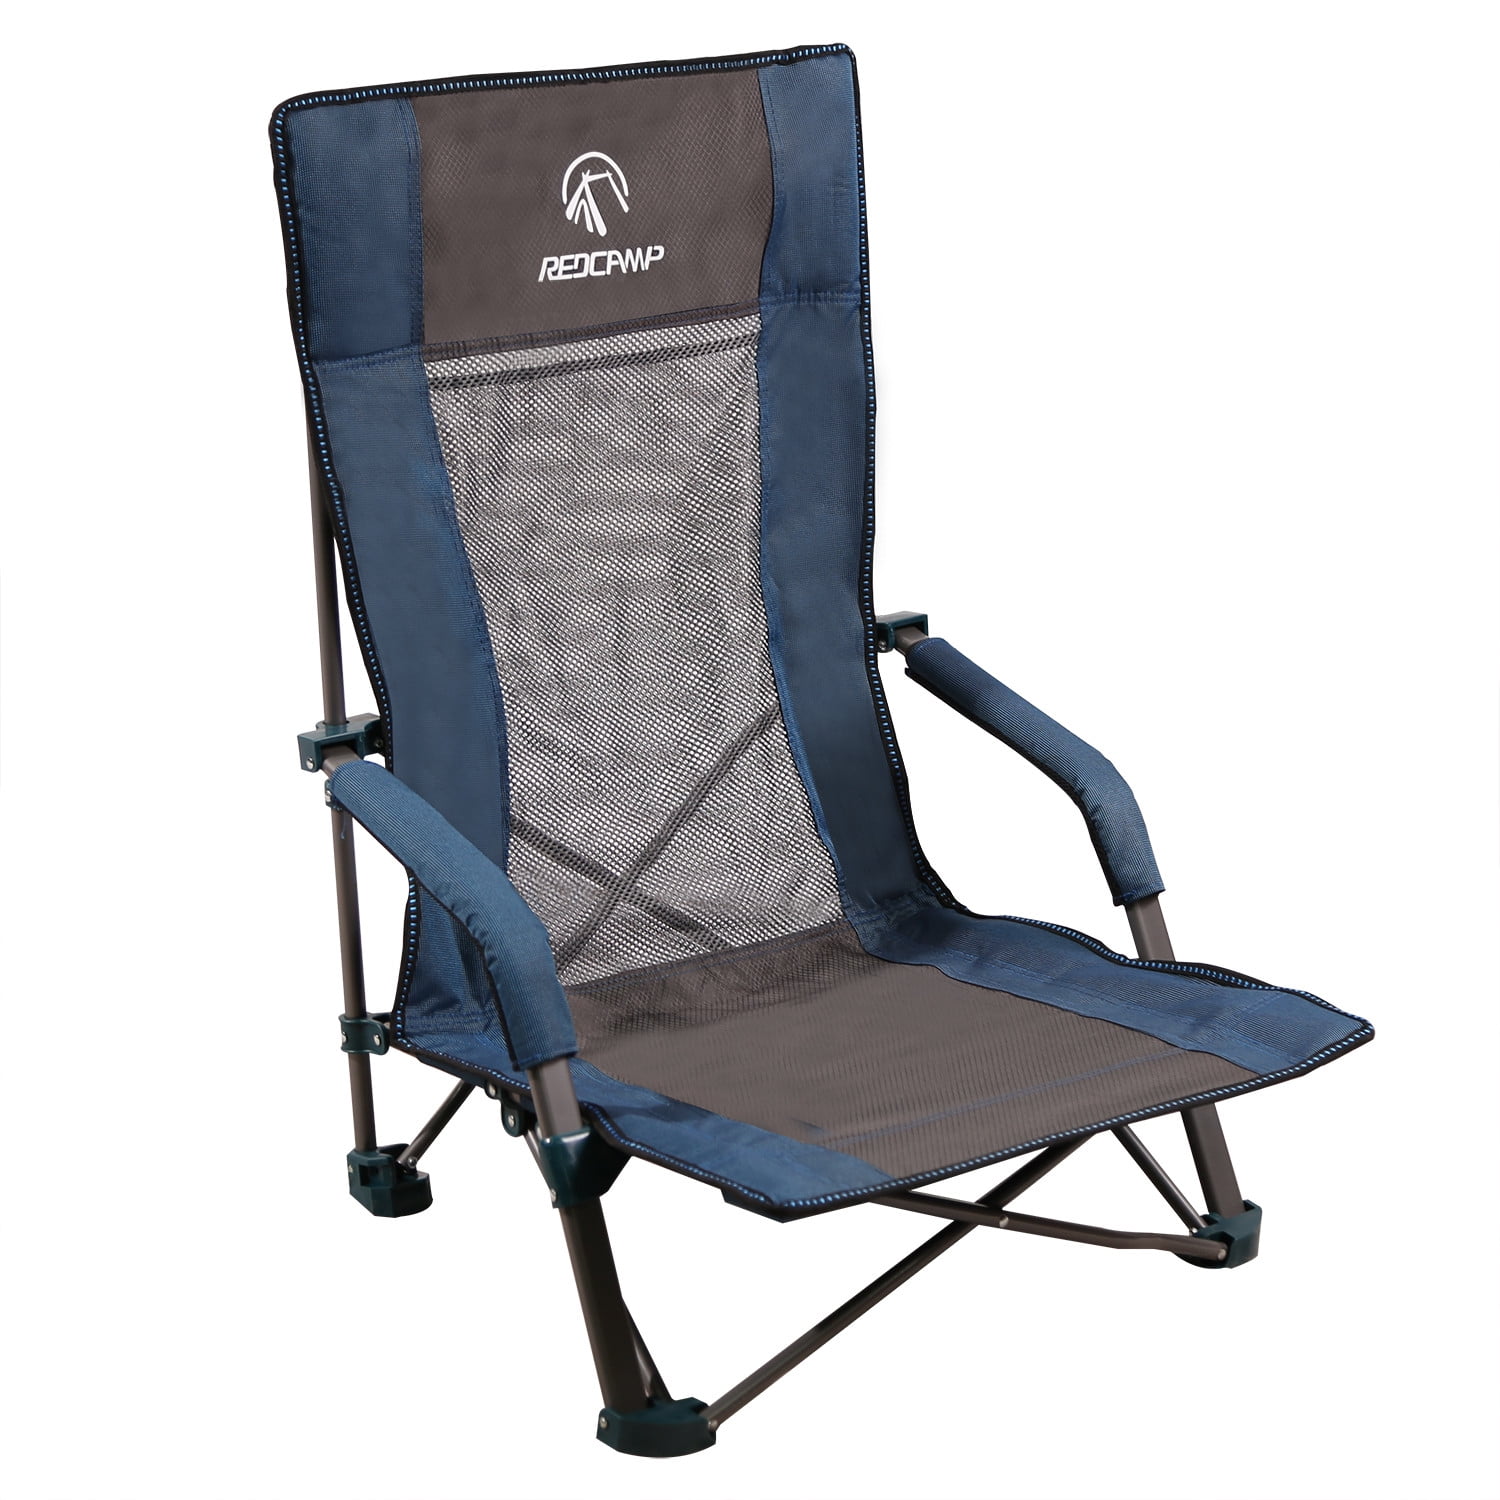 REDCAMP Low Beach Chair Folding Lightweight with High Back, Portable